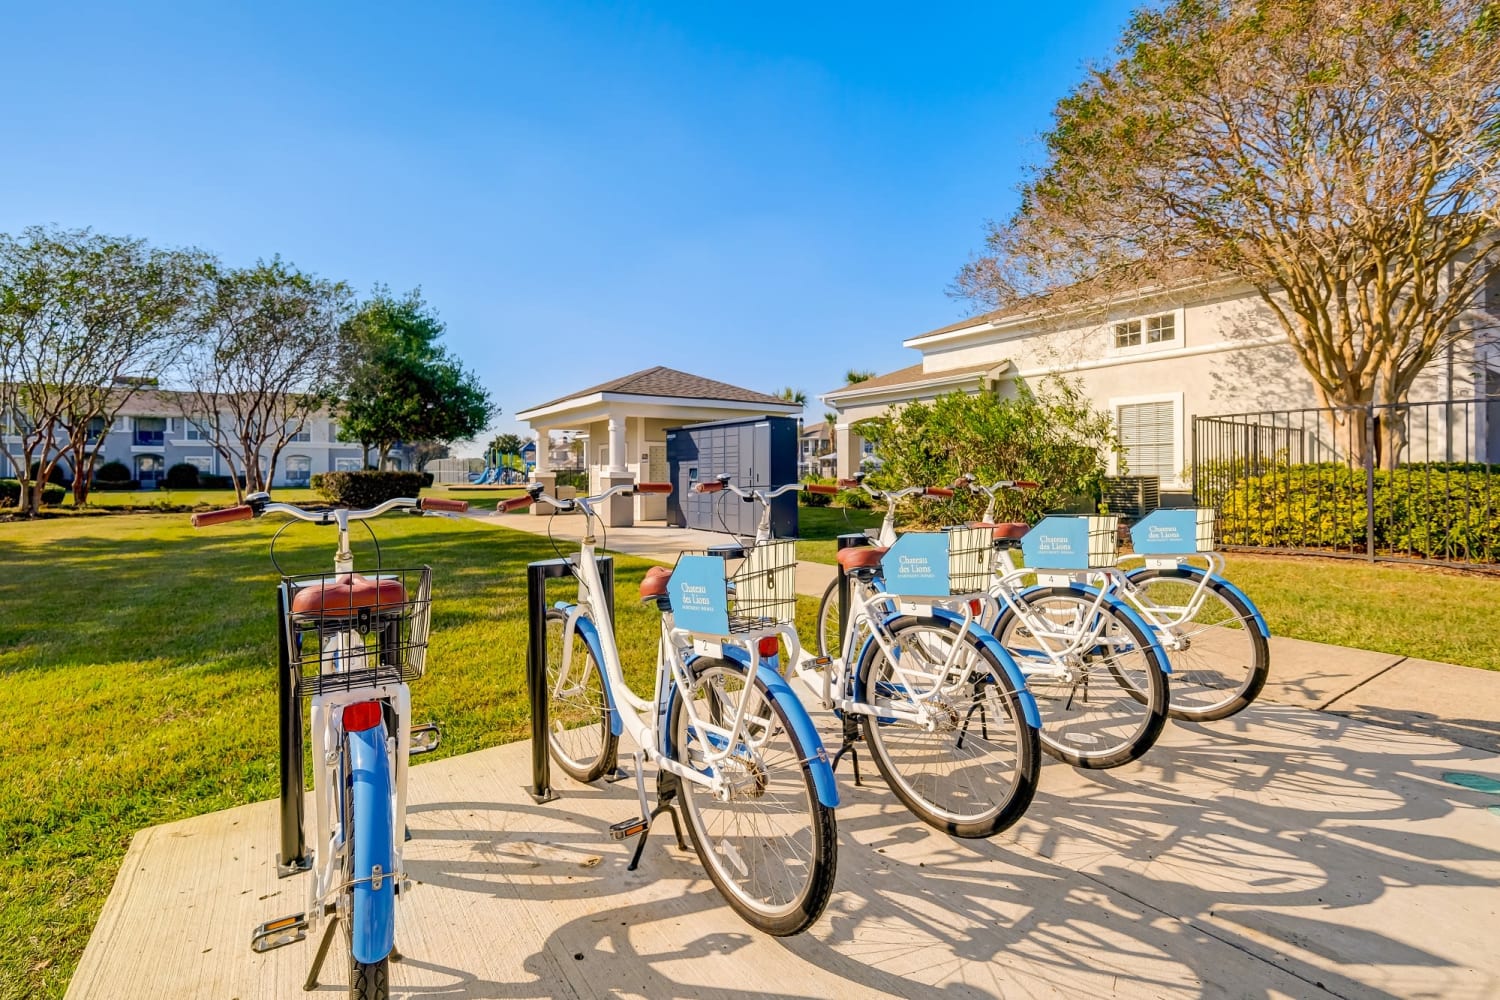 Bikeshare station at Chateau des Lions Apartment Homes in Lafayette, Louisiana